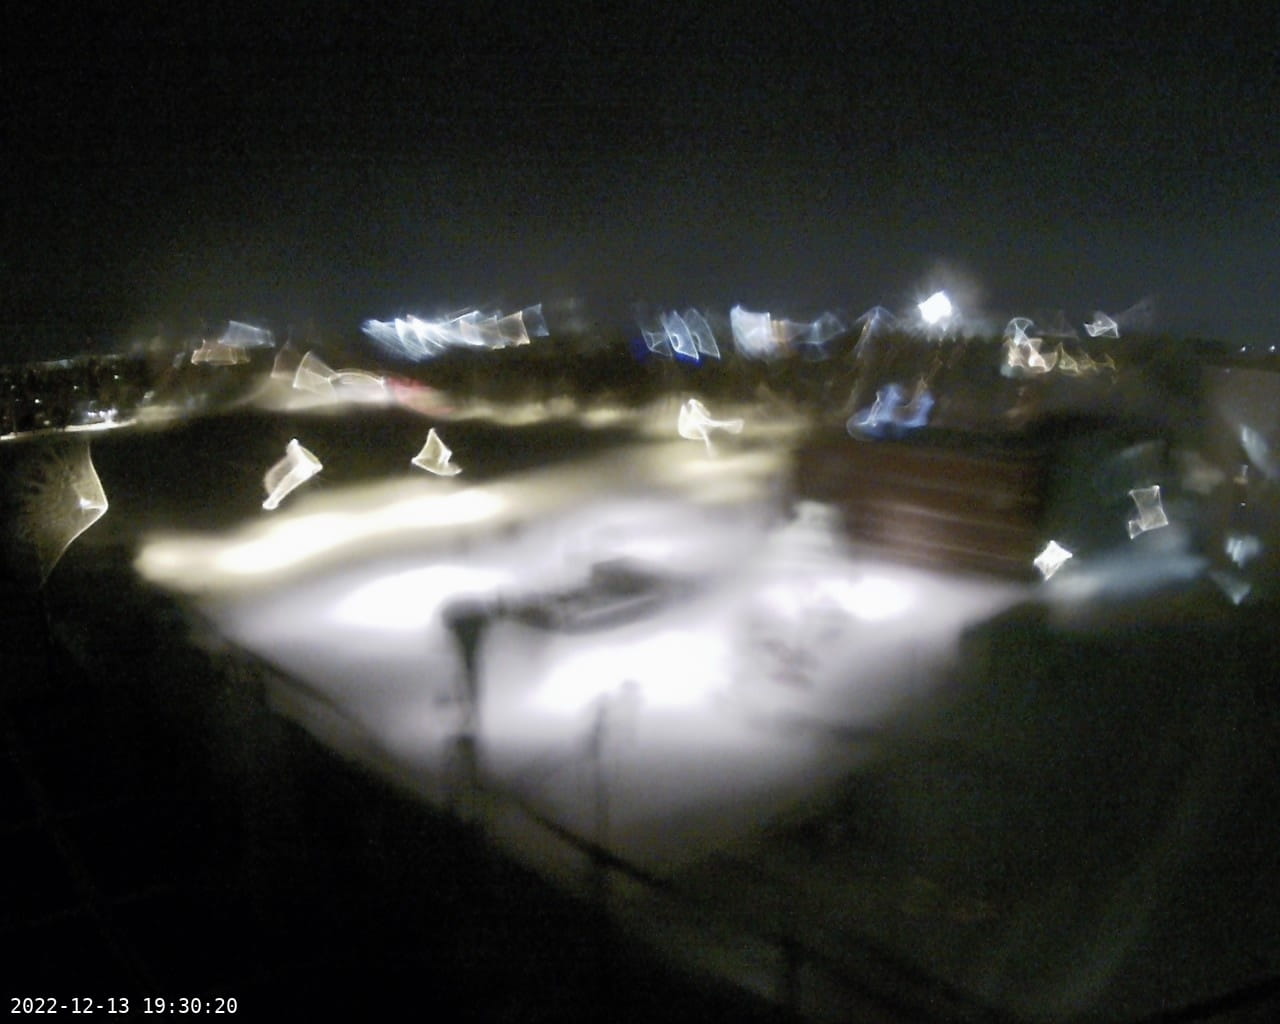 a view from the camera on december 13 2022, 7:30pm, a parking lot and some buildings seen. the street lights distorted into fun shapes from the snowmelt on the lens